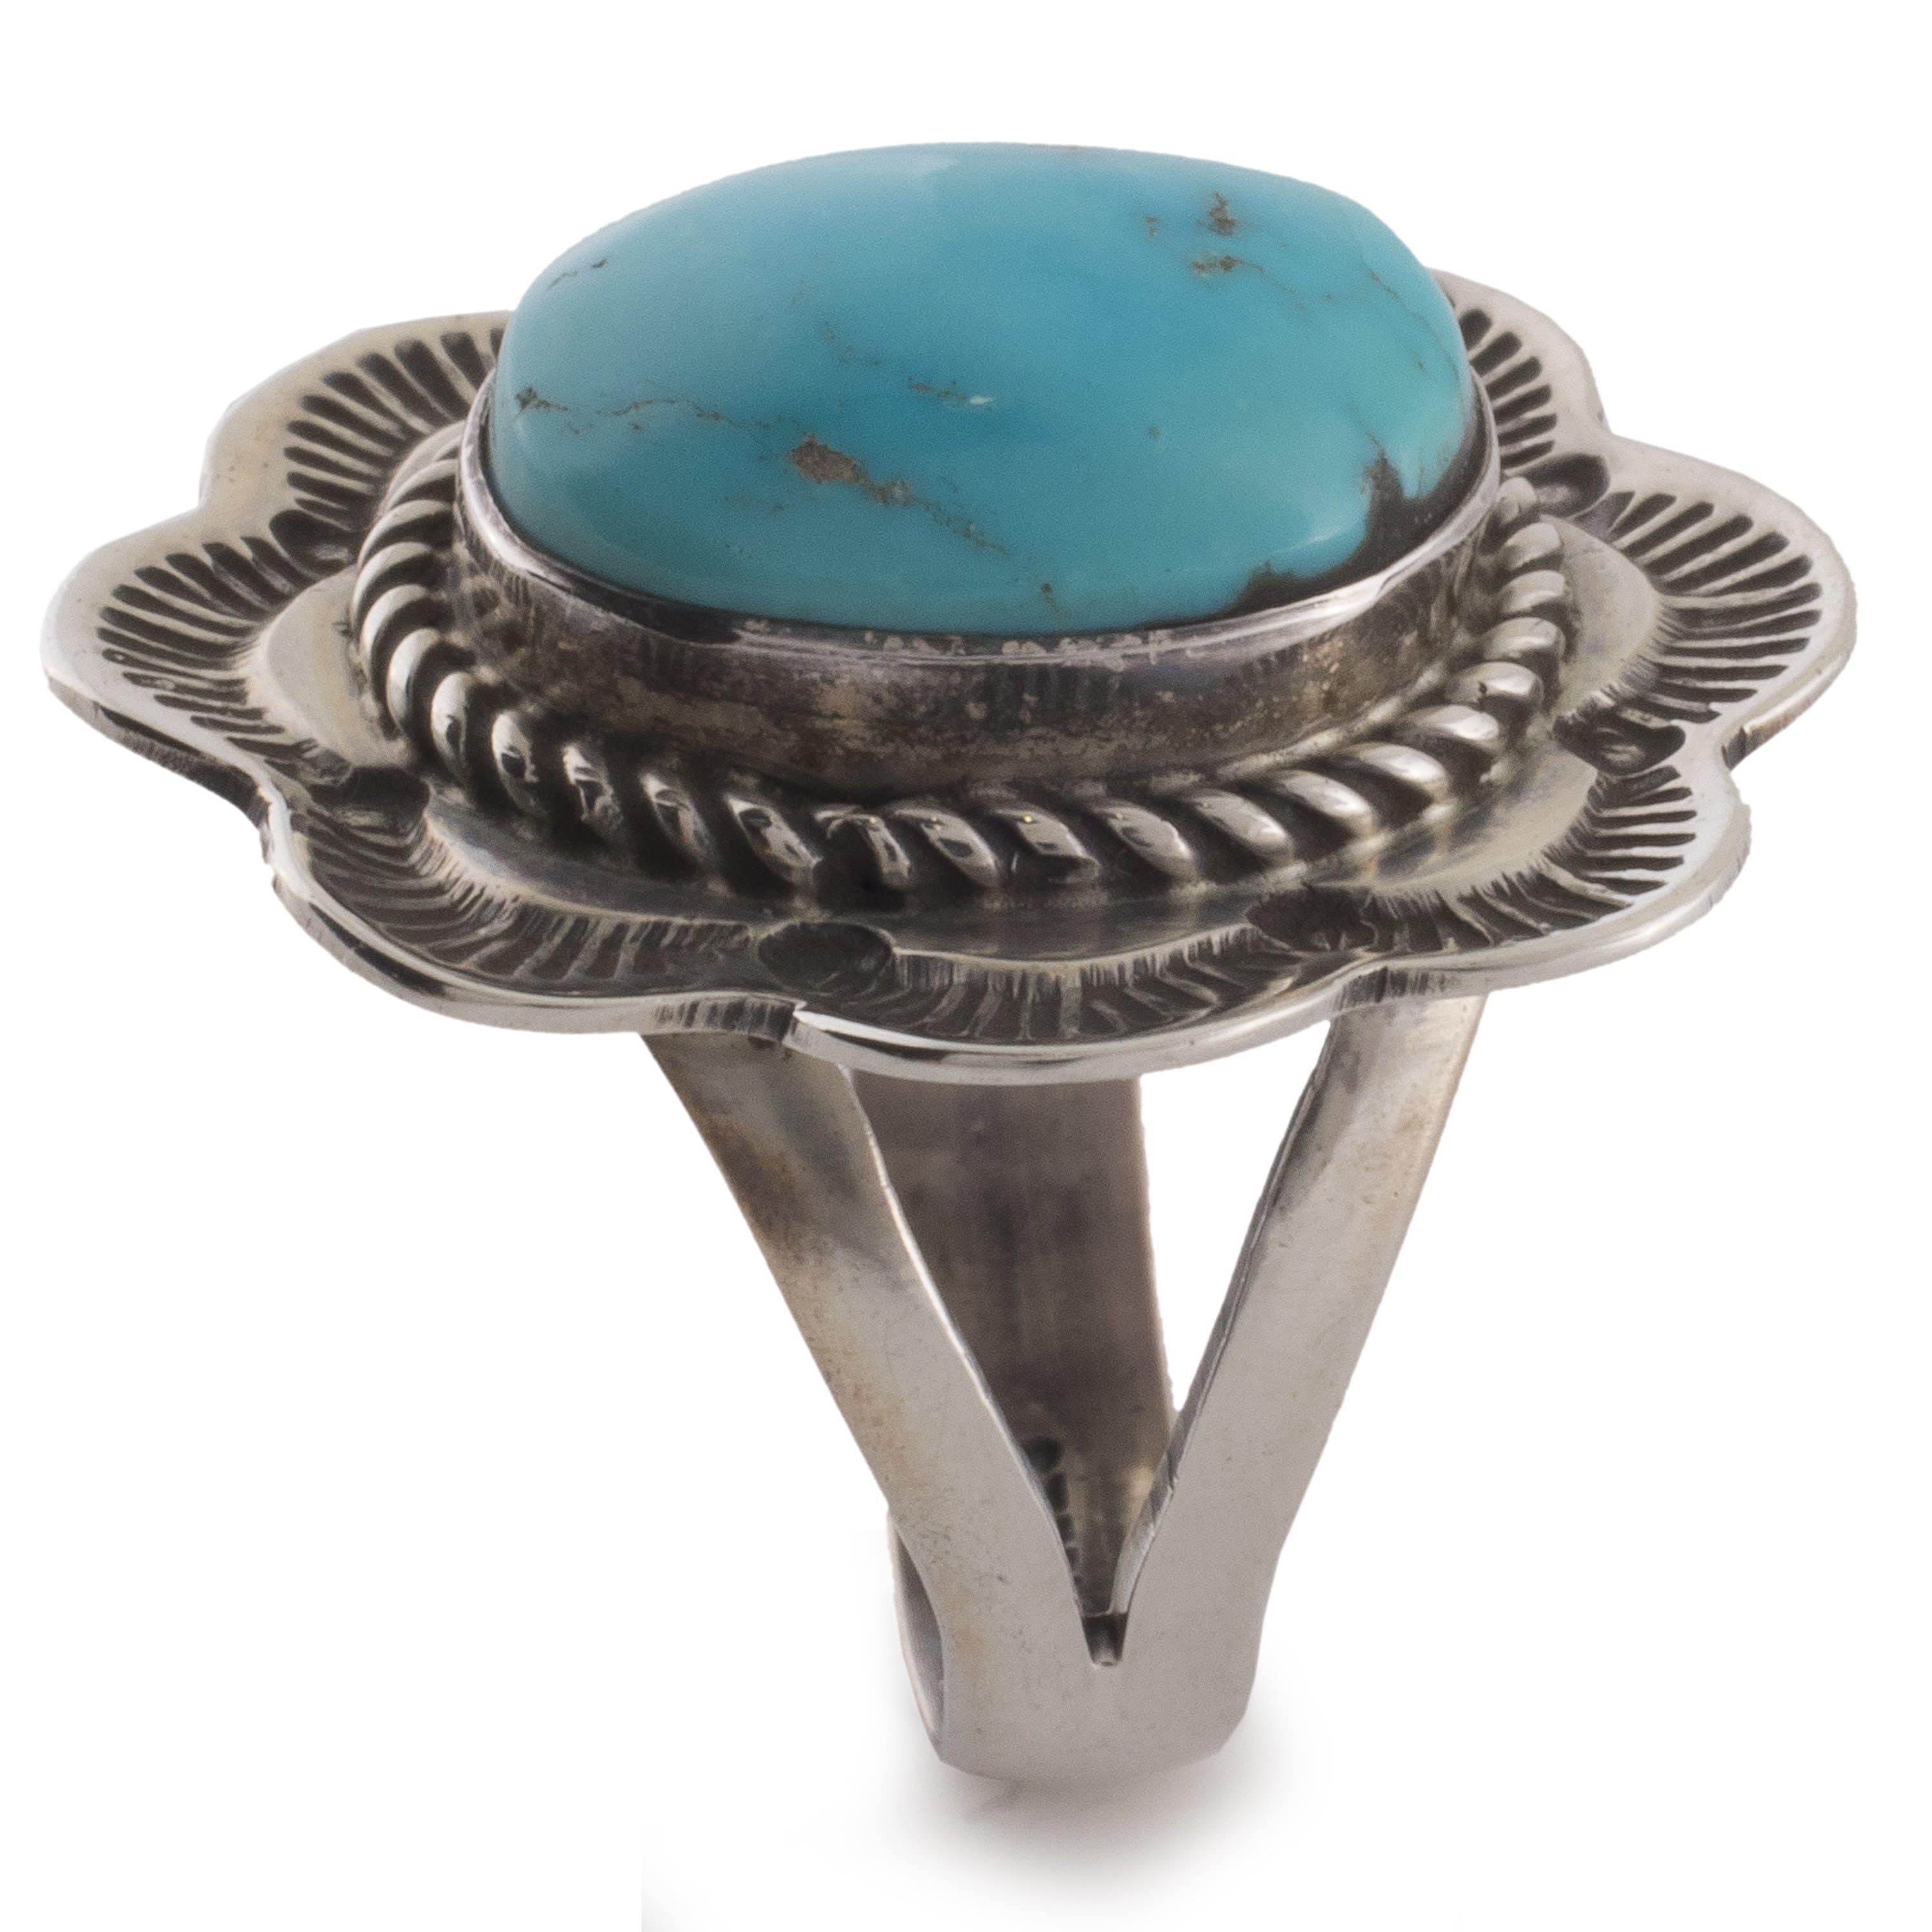 Kalifano Native American Jewelry 5 Kingman Turquoise USA Native American Made 925 Sterling Silver Ring NAR400.040.5